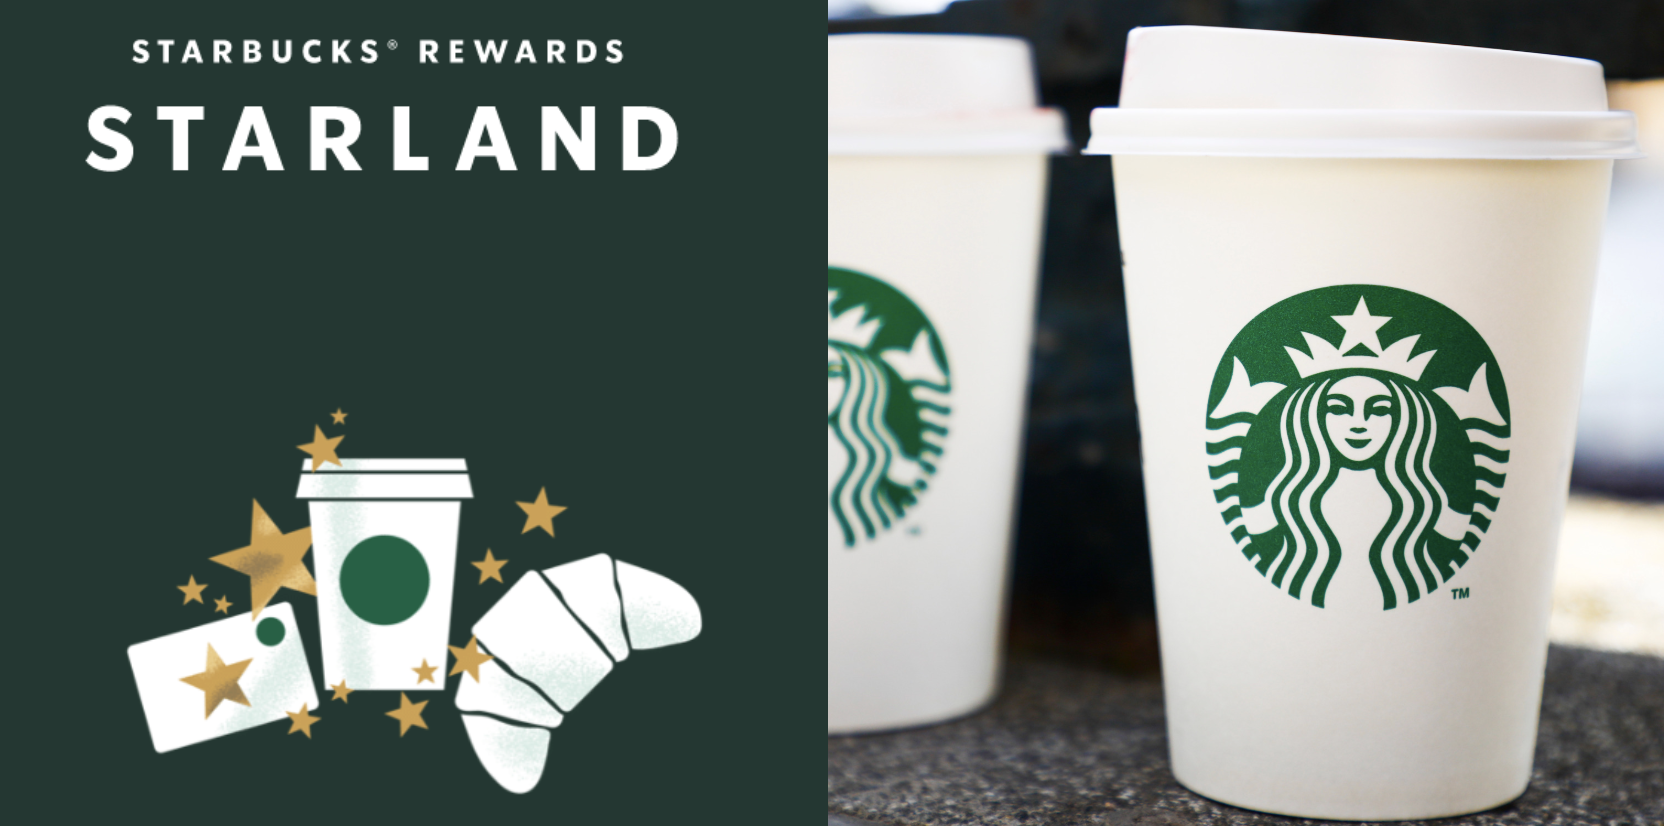 Starbucks Launches In App Game Called Starland How To Win